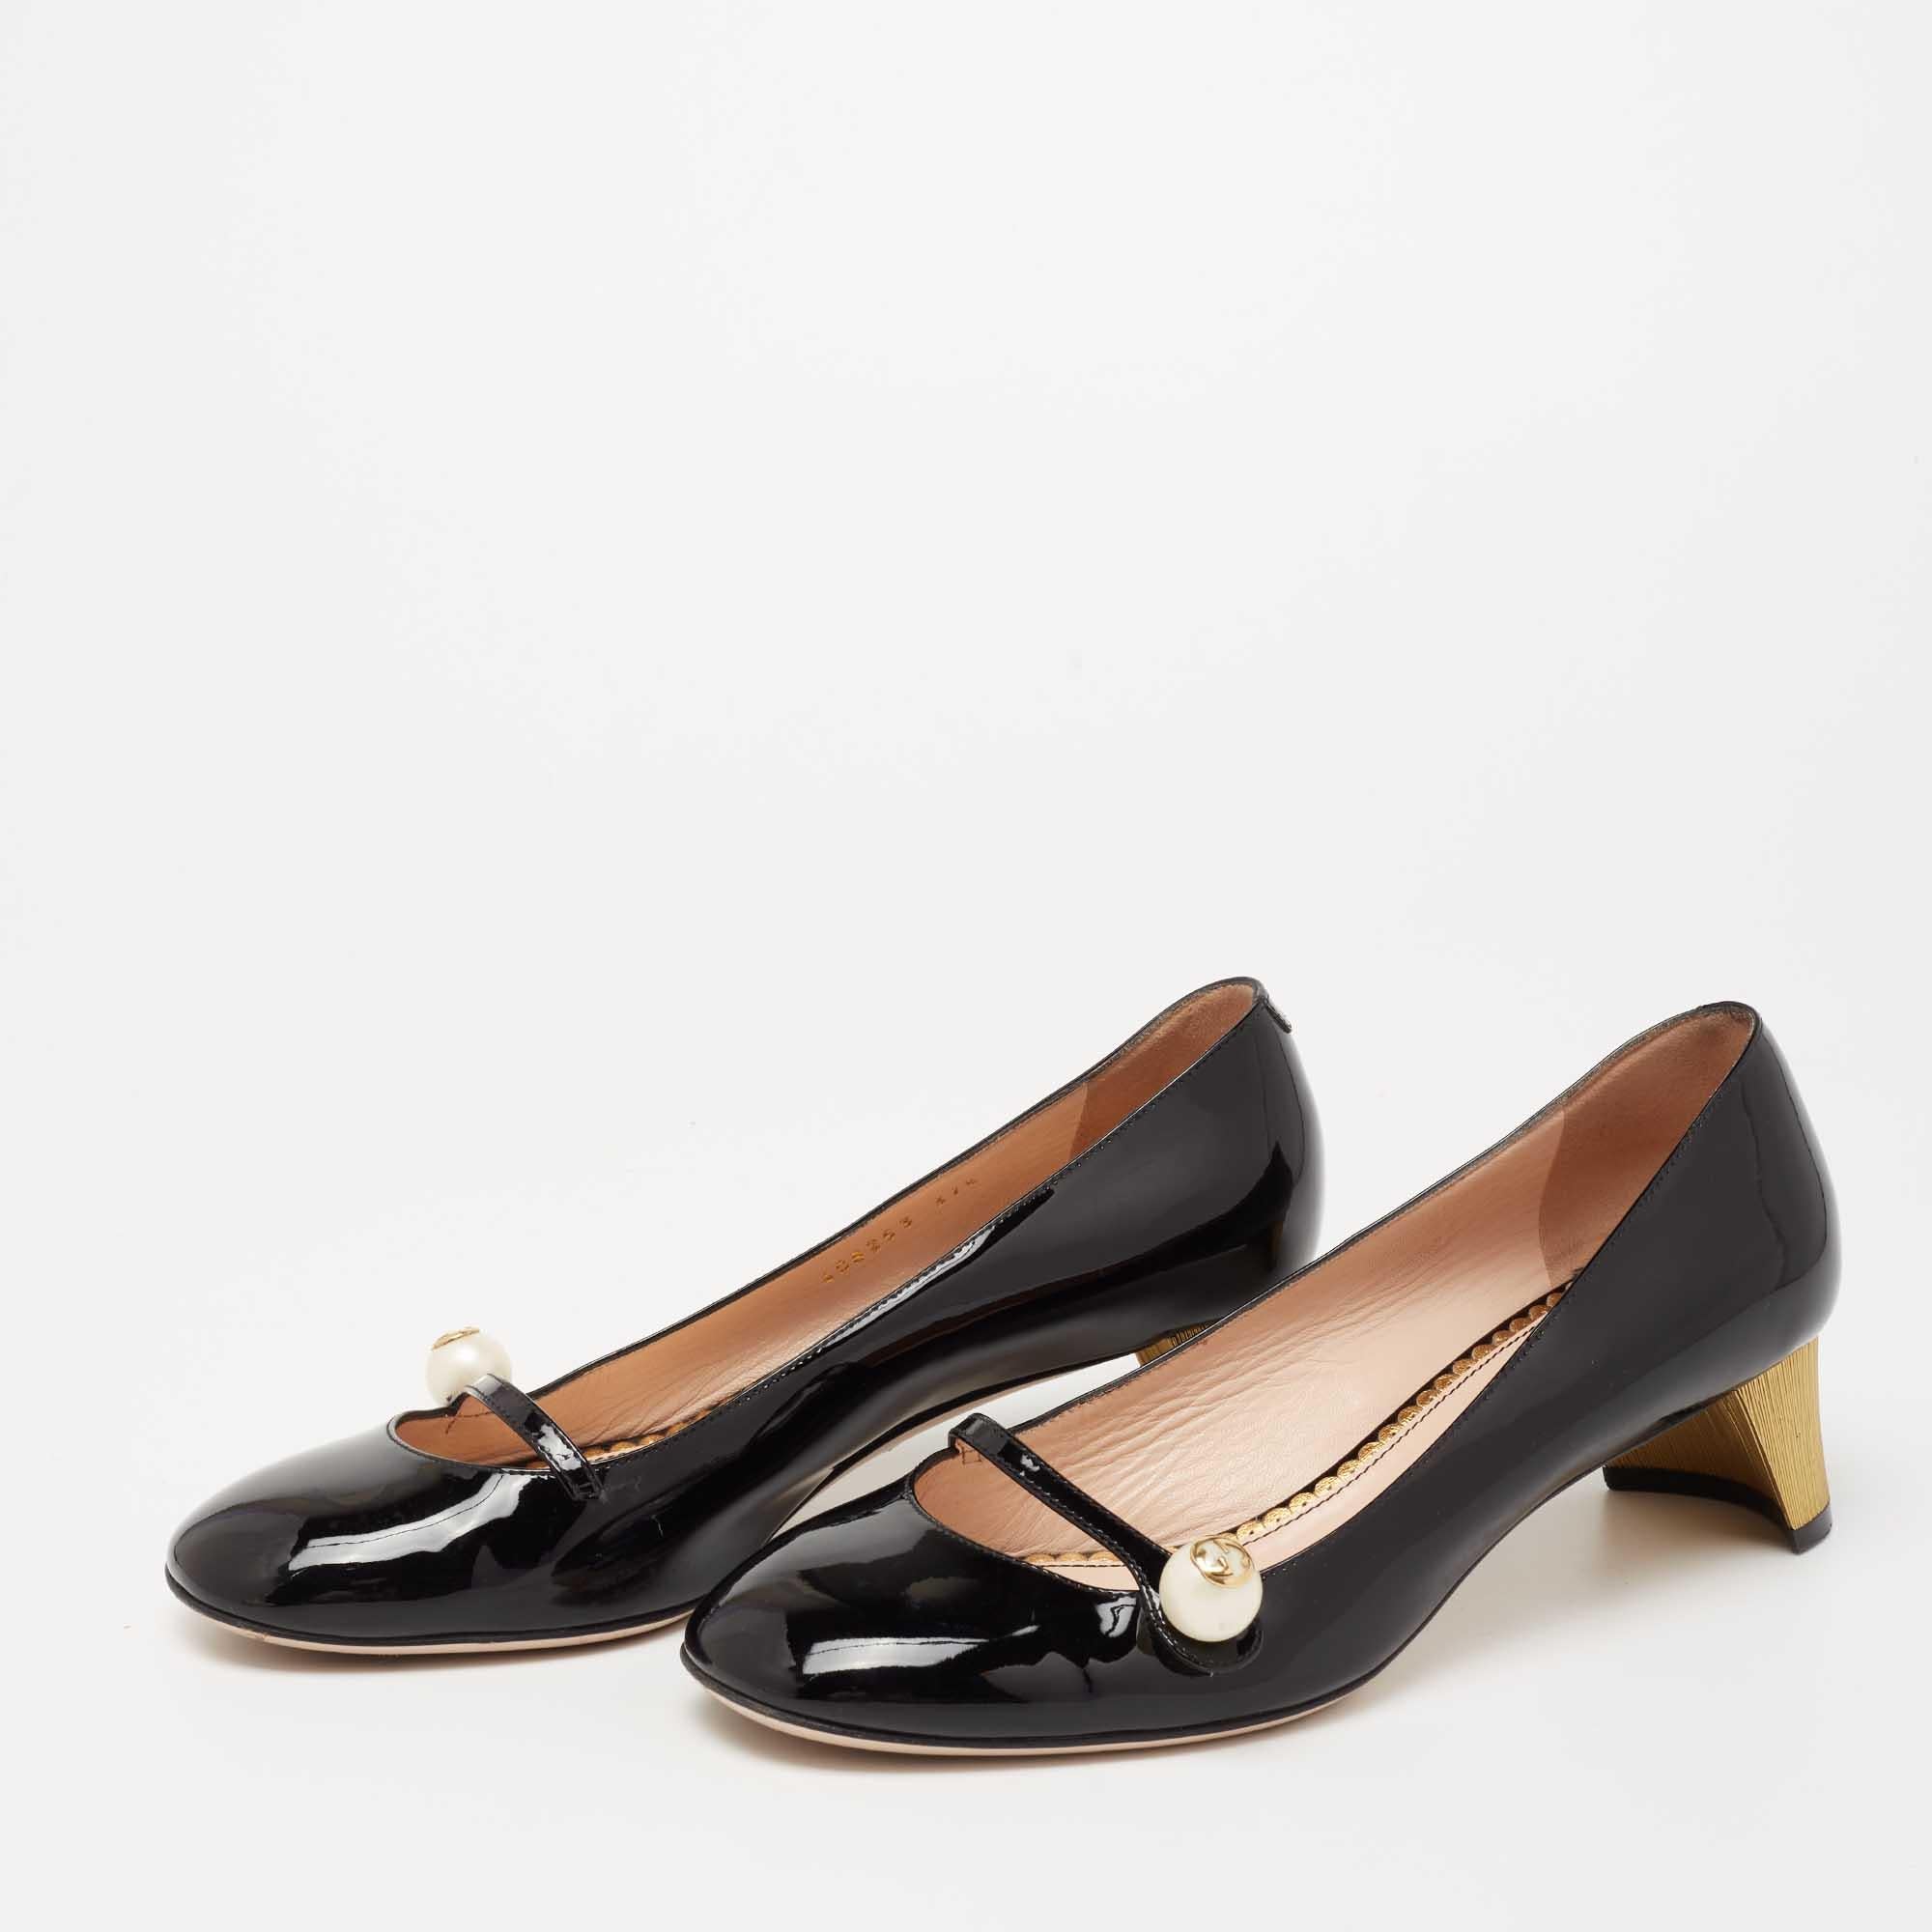 These Gucci pumps come in a mary jane silhouette and are as feminine and stylish as they can get— thanks to the logo-accented pearl button closure and gold-tone heels. With round toes, glossy patent leather construction, and a black shade, these